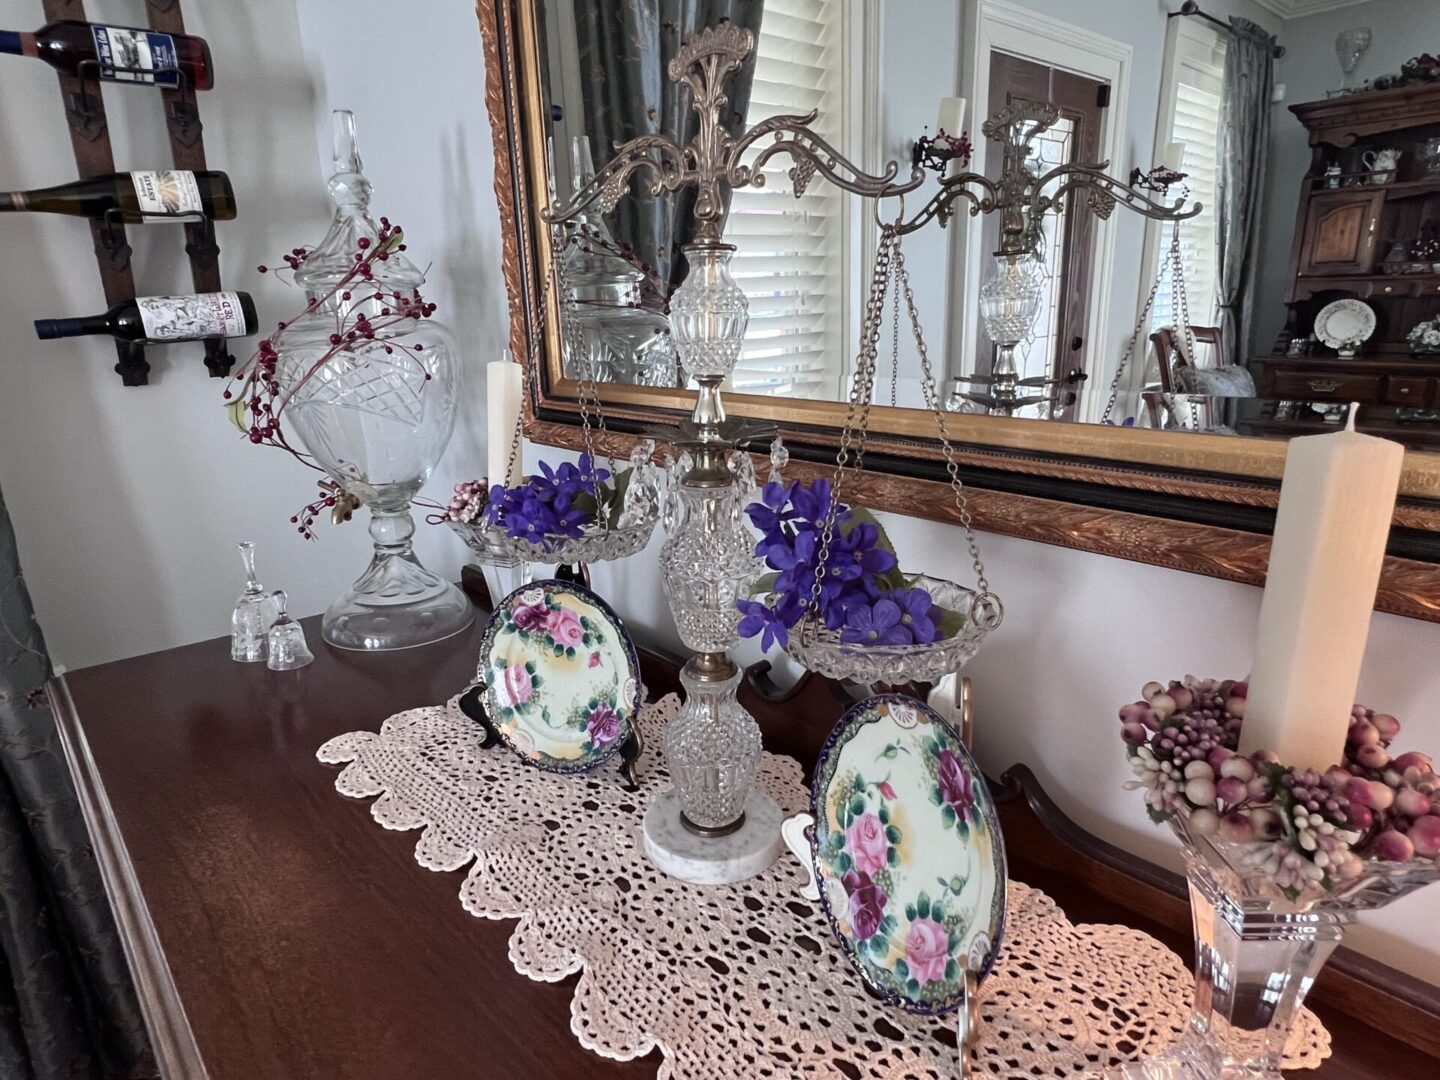 A table with two vases and a mirror